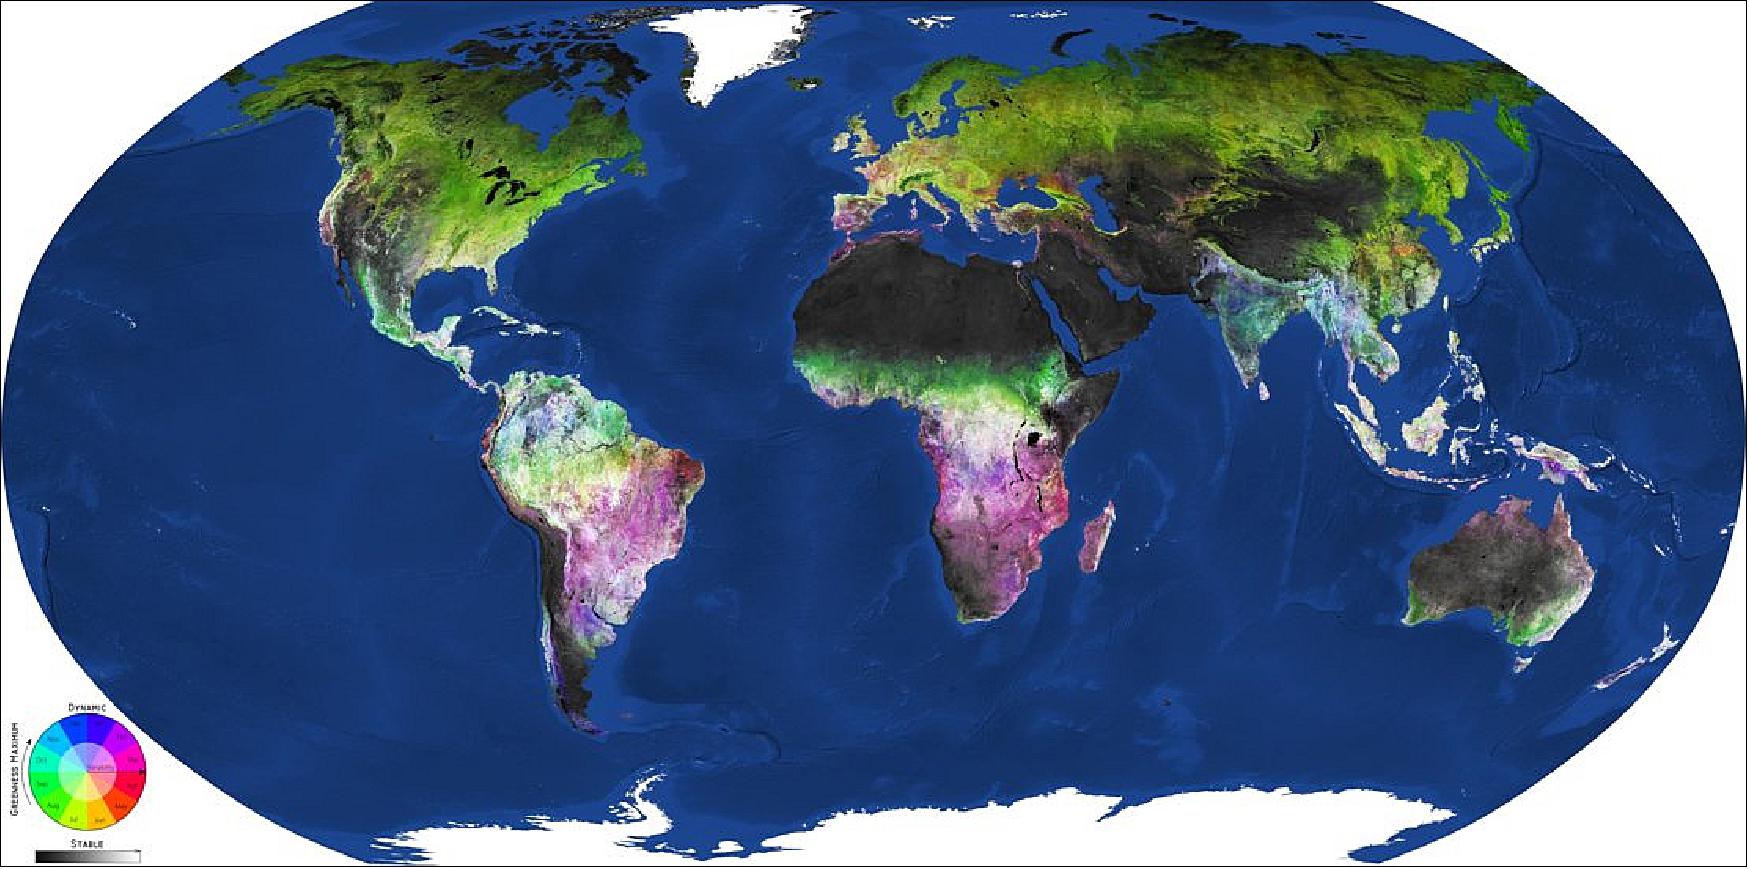 Figure 44: Data from the Copernicus Sentinel-2 mission has been used to generate a new high-resolution map of vegetation across Earth’s entire landmass. The new map depicts global vegetation dynamics and gives insight into land productivity. The time of vegetation peak i.e. the month at which greenness maximum occurs is shown in red (spring) and green (summer) to blue tones (autumn and winter.) The variability of vegetation greenness is represented by light tones in low amplitude areas such as managed grasslands, while high amplitudes are represented by saturated color tones. Areas with low biomass such as urban areas and open bodies of water are shown in black, while areas with higher biomass appear in grey and white tones (image credit: ESA, the image contains modified Copernicus Sentinel data (2016–18), processed by GeoVille)